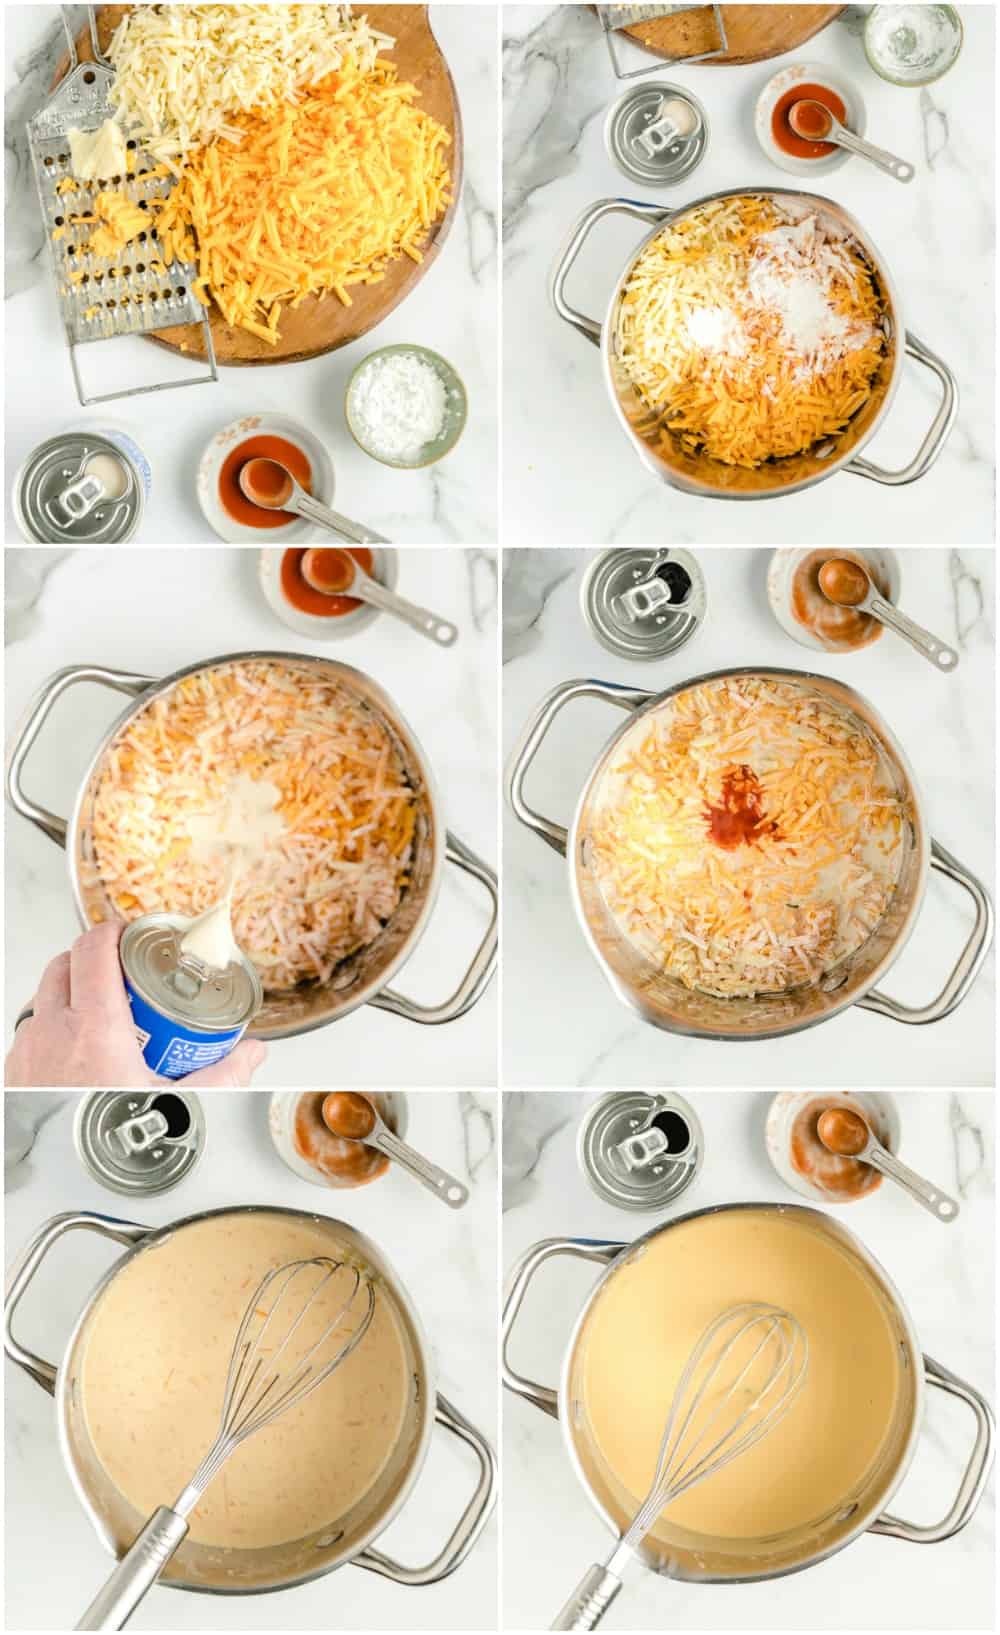 how to make nacho cheese sauce step by step photos